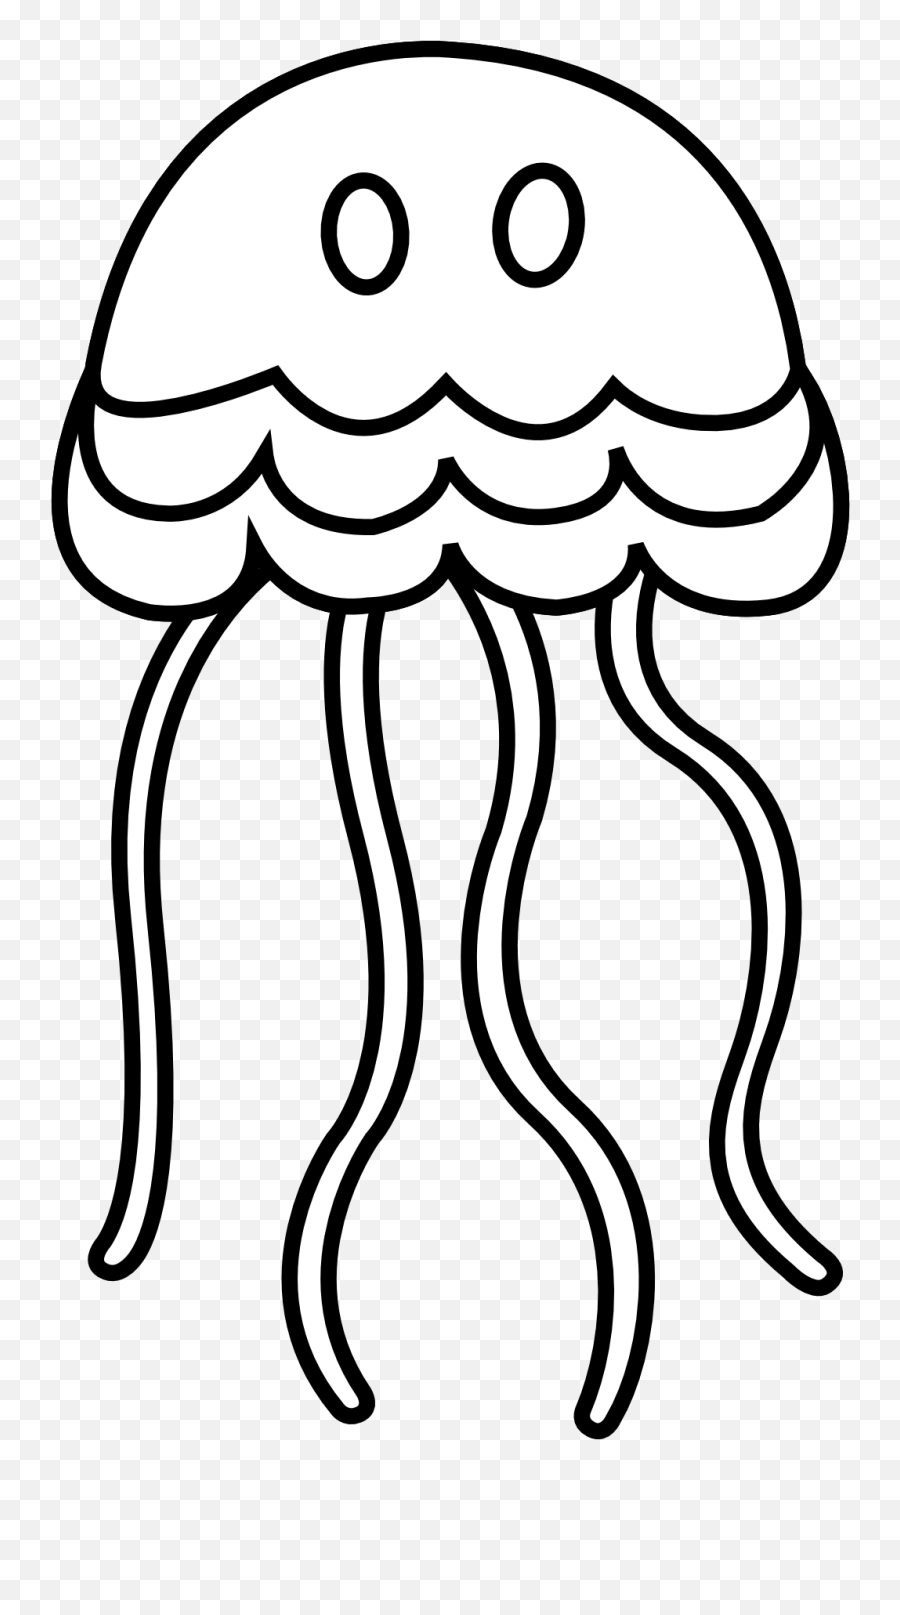 Black And White Download Clip Art Png - Clip Art Black And White Jellyfish Emoji,Easy Pictures To Draw Of Black And White Laughing Emojis